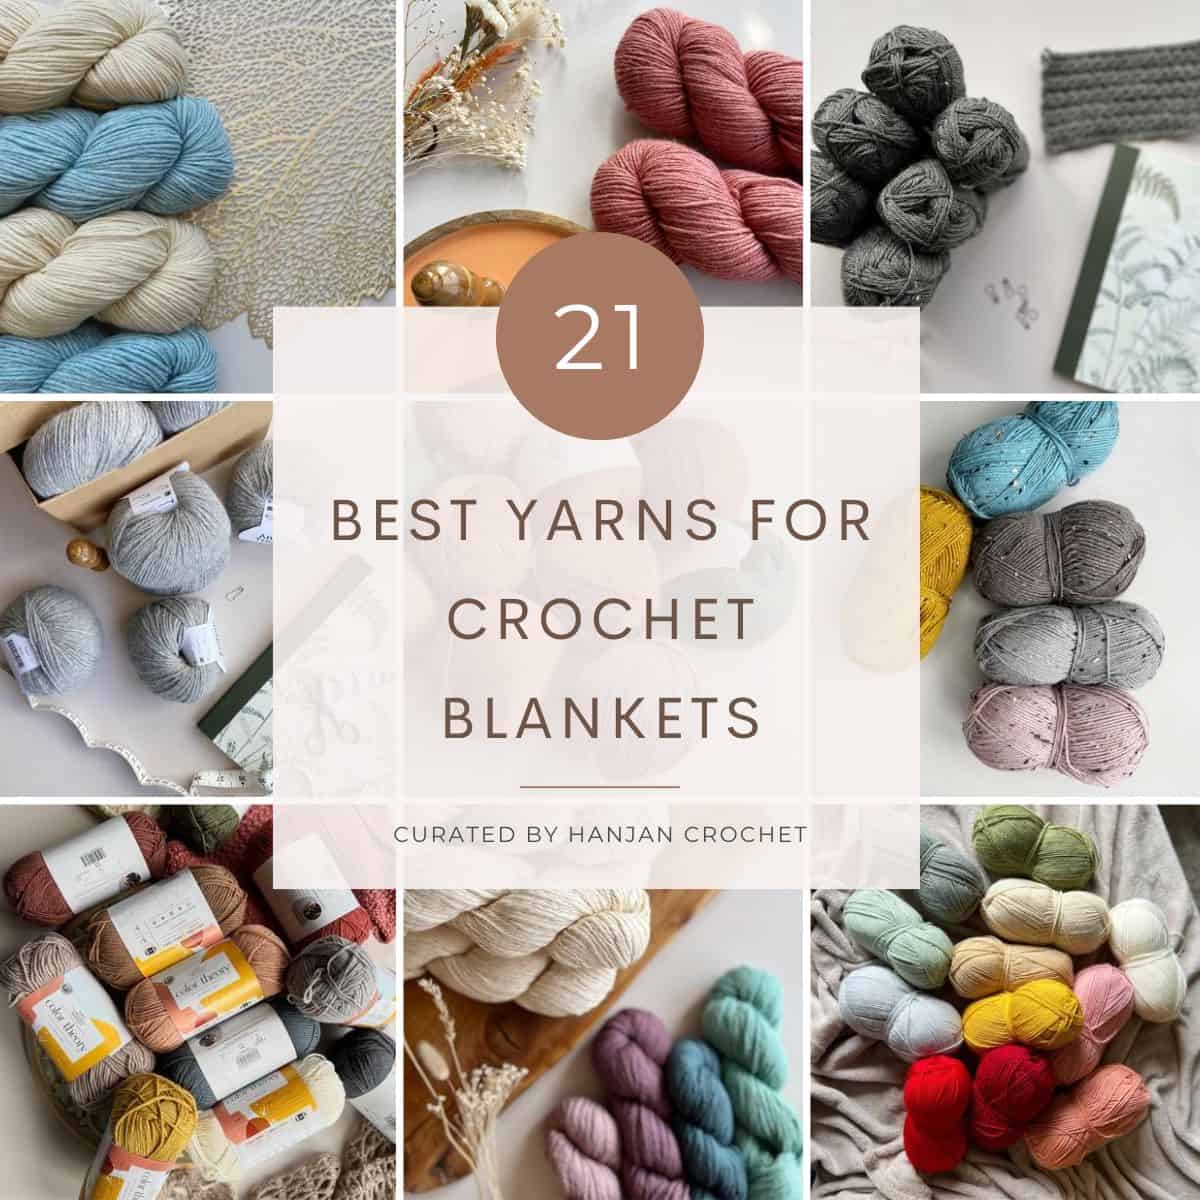 Best Yarn for Crochet Blankets – top 21 for all yarn weights